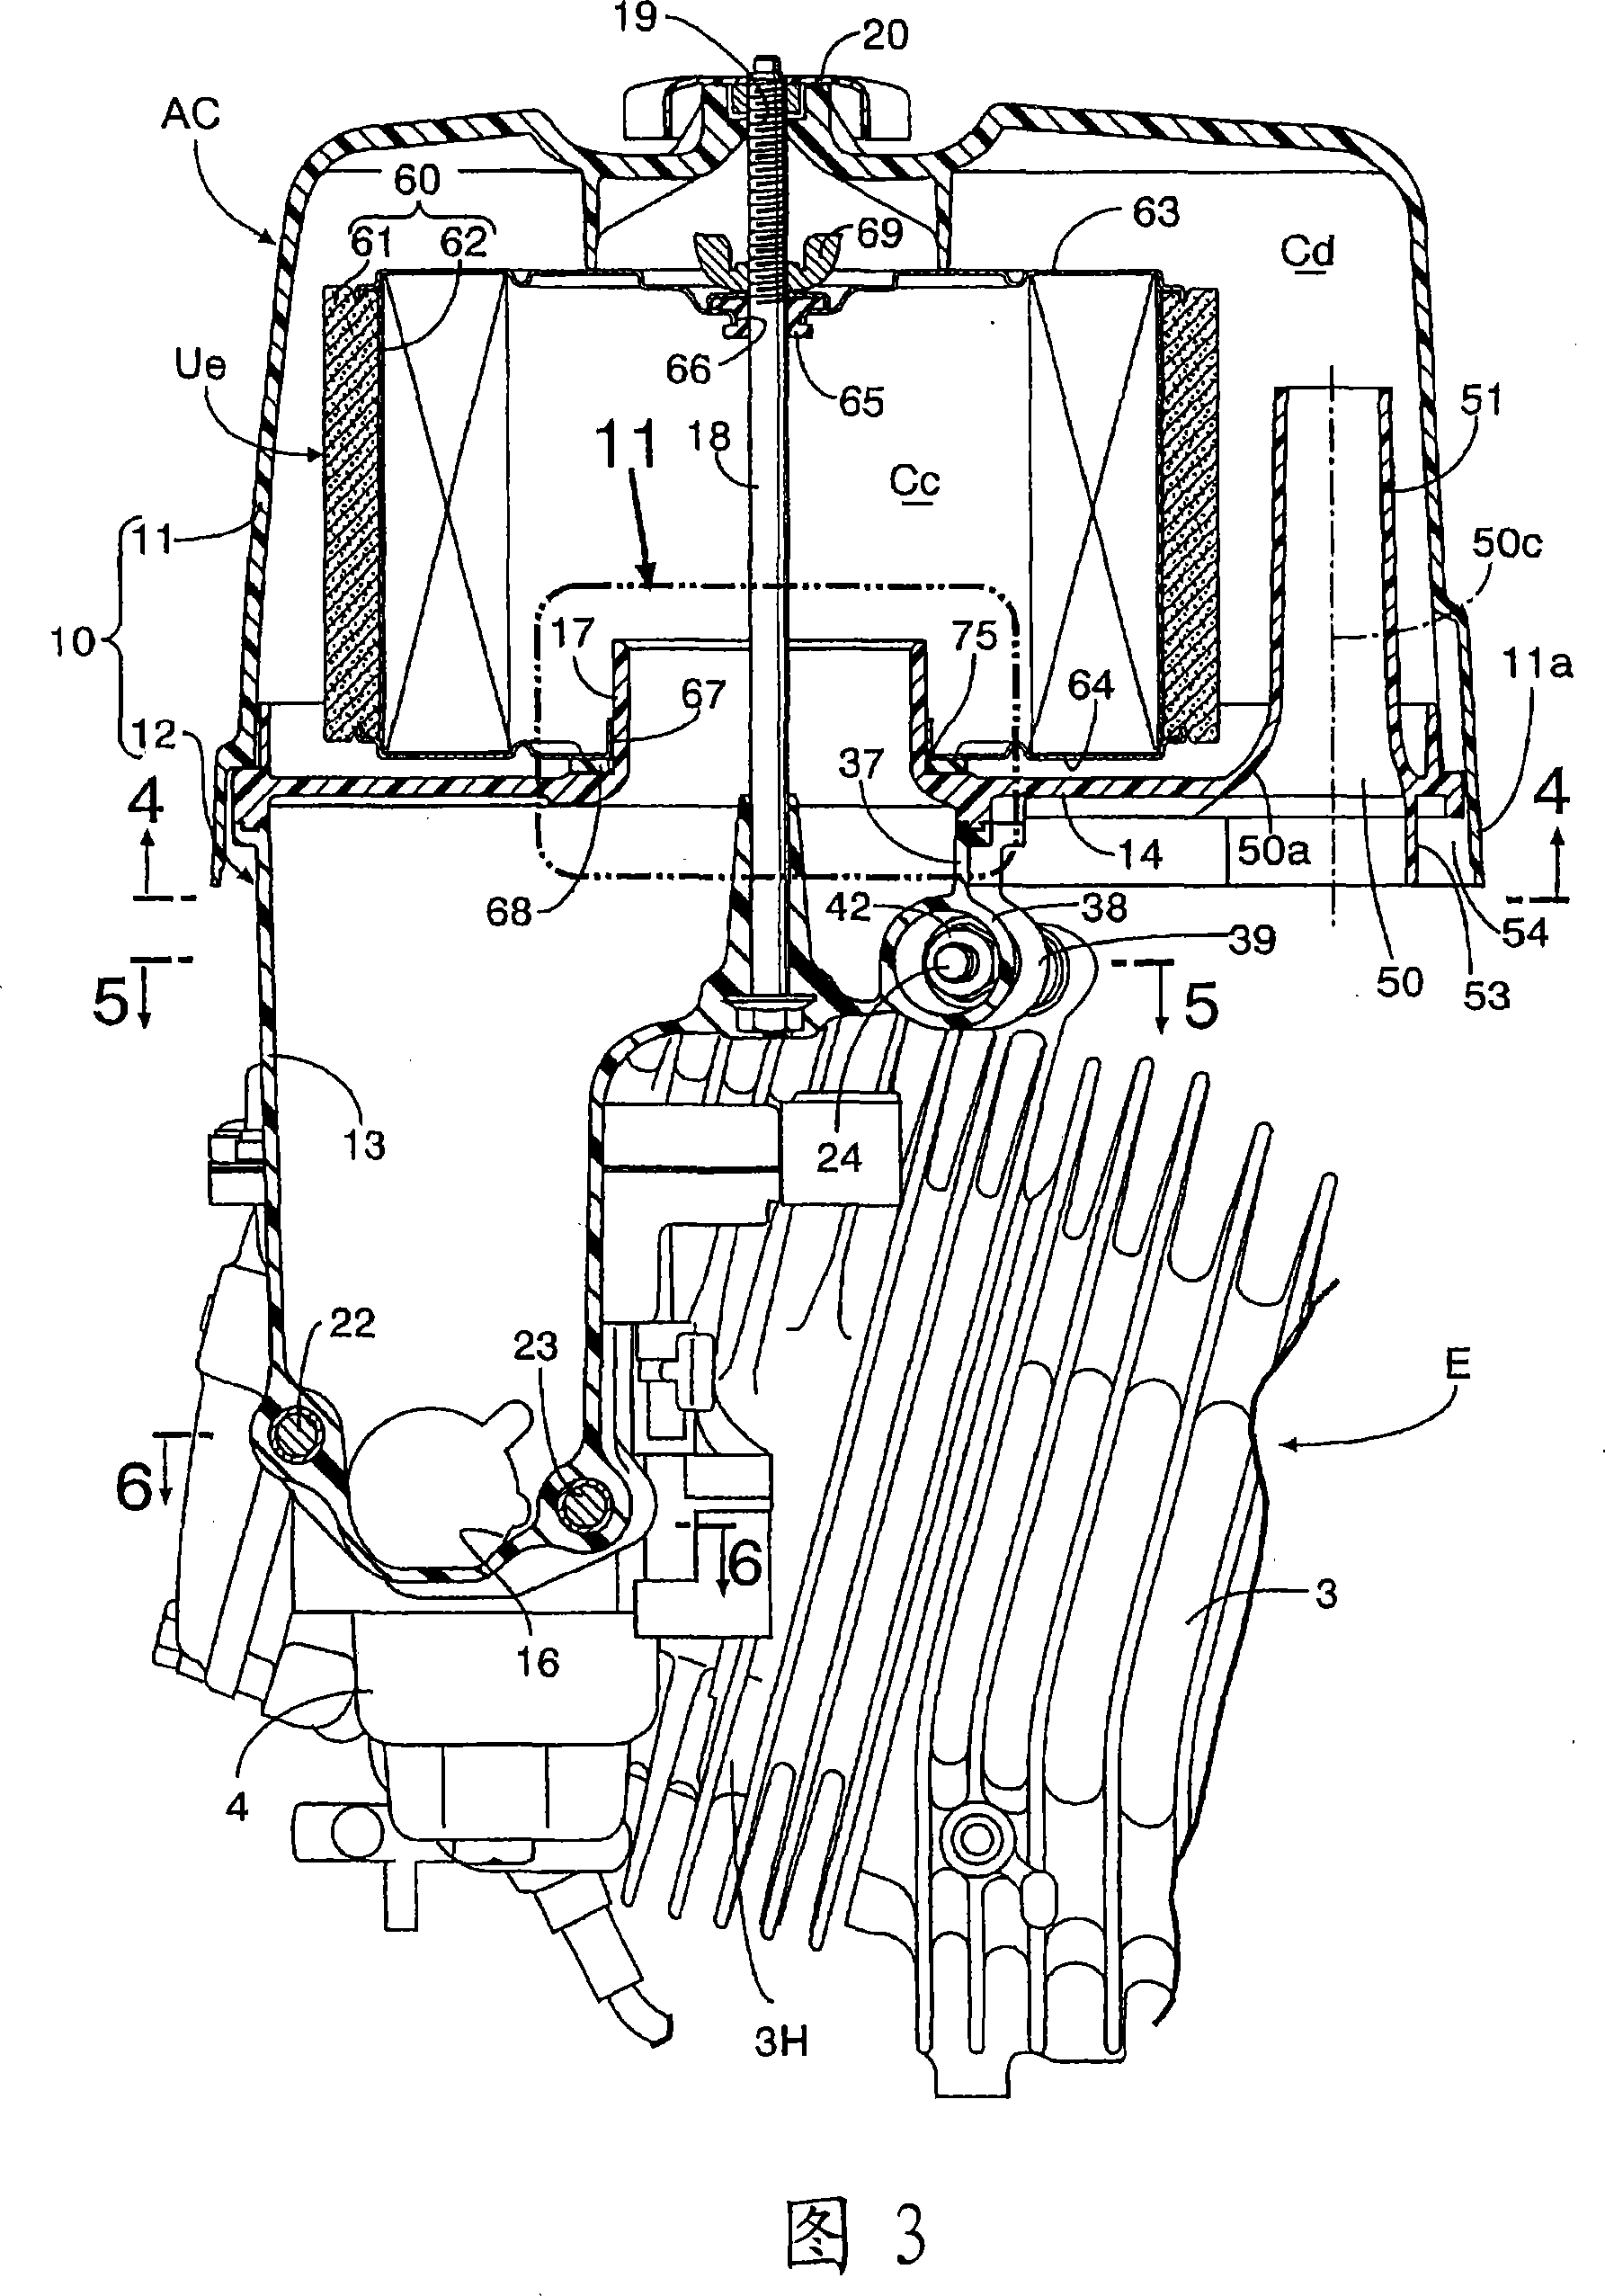 Air cleaner of engine and air cleaner mounting device for mounting air cleaner on engine